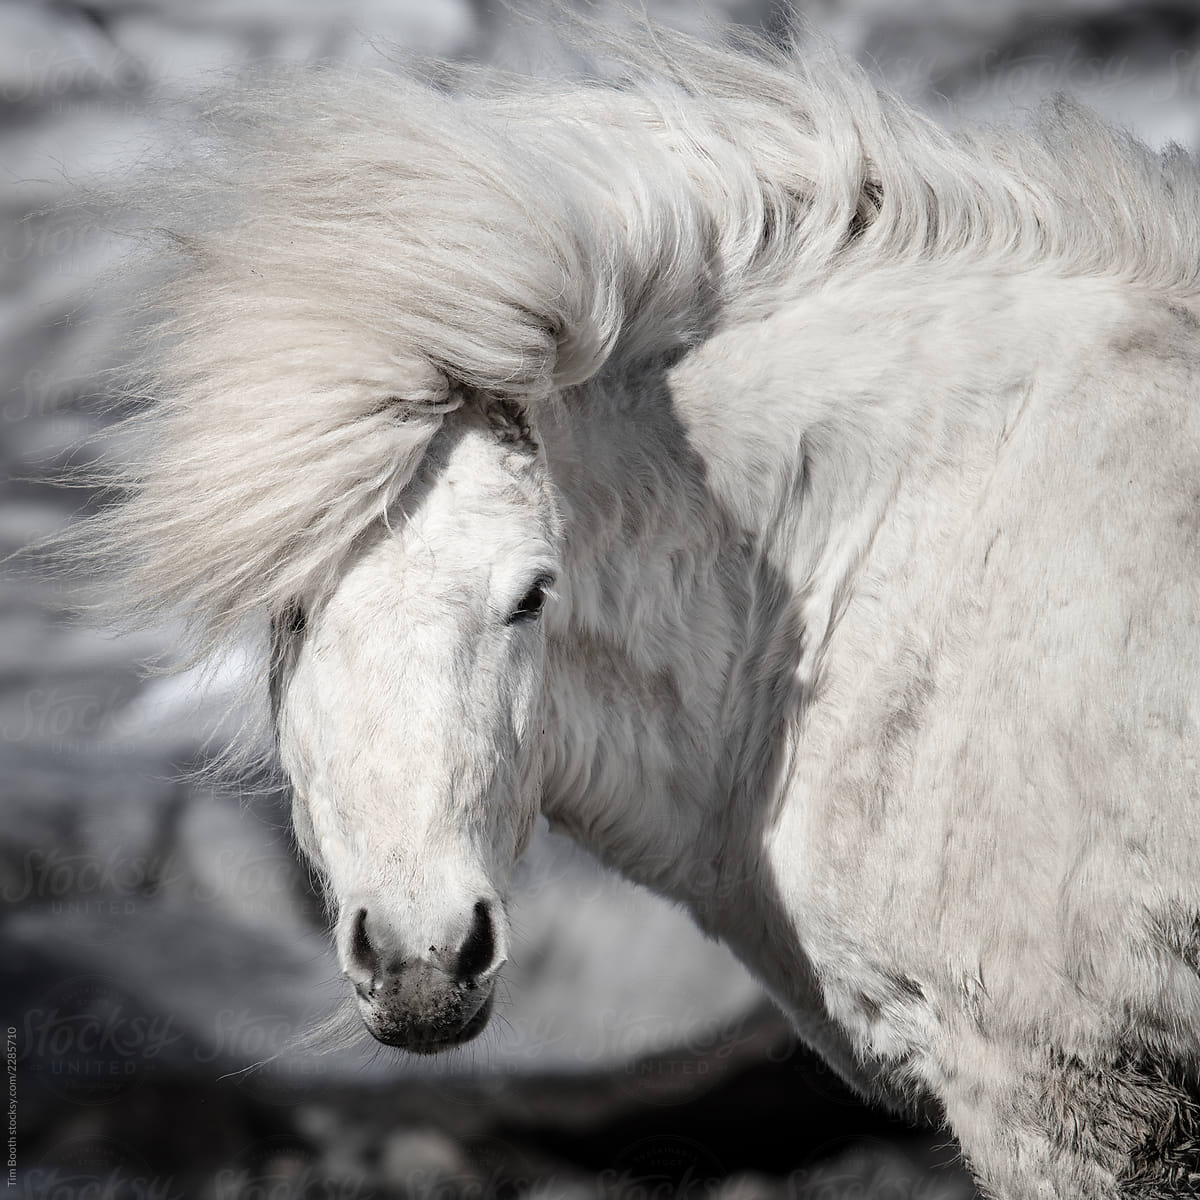 An Icelandic horse in front of ice